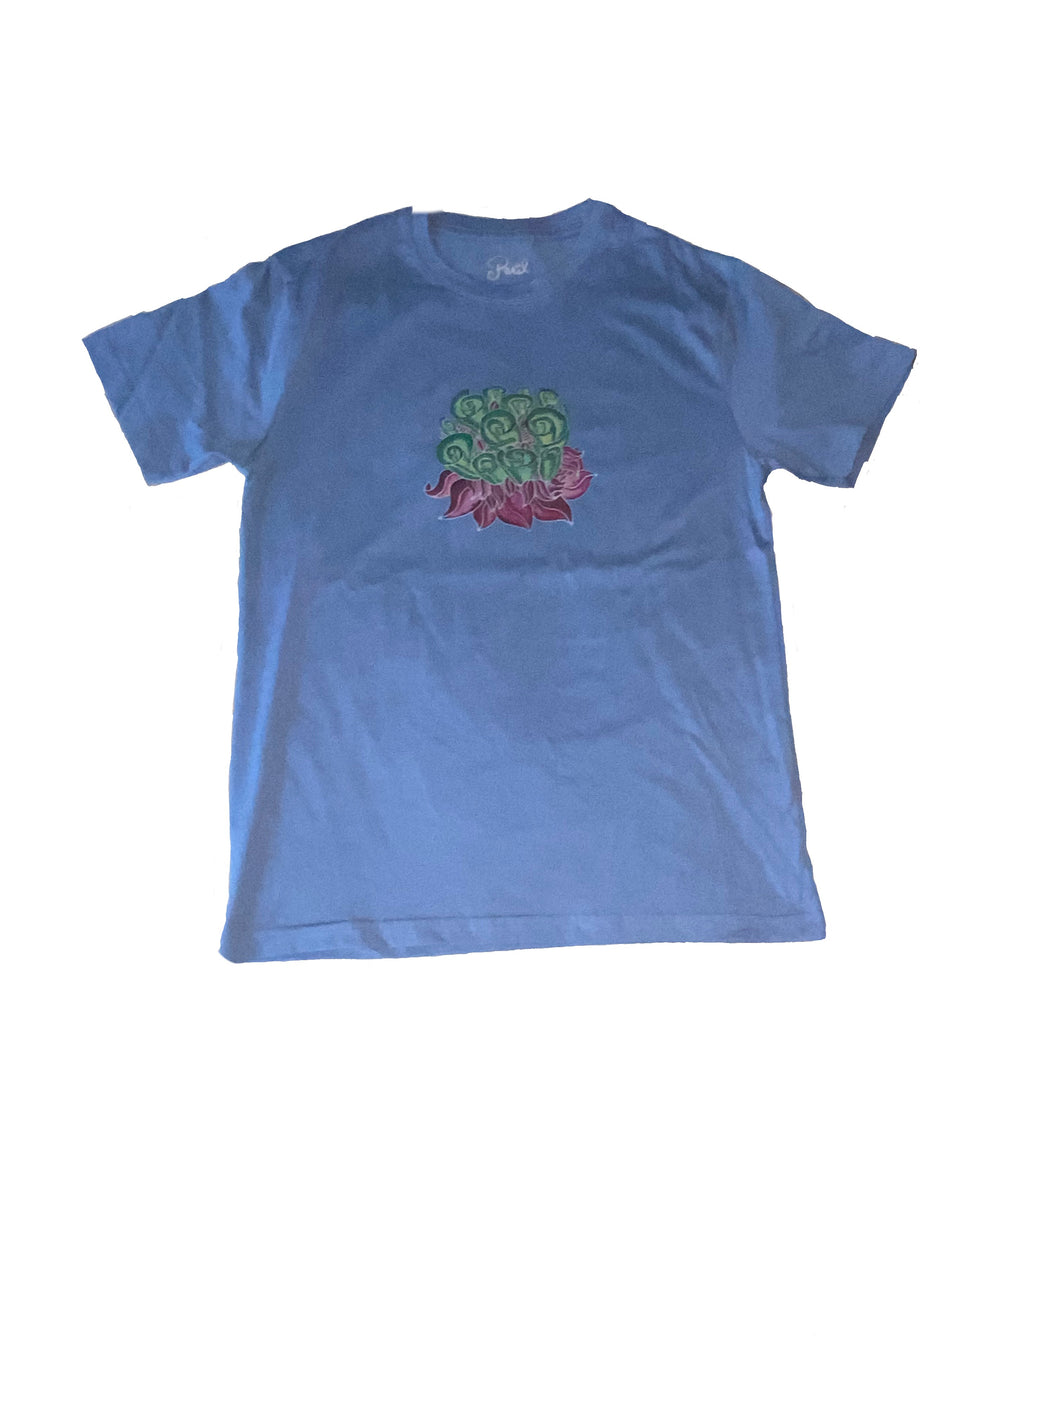 Roses Tee (Cloudy Blue)